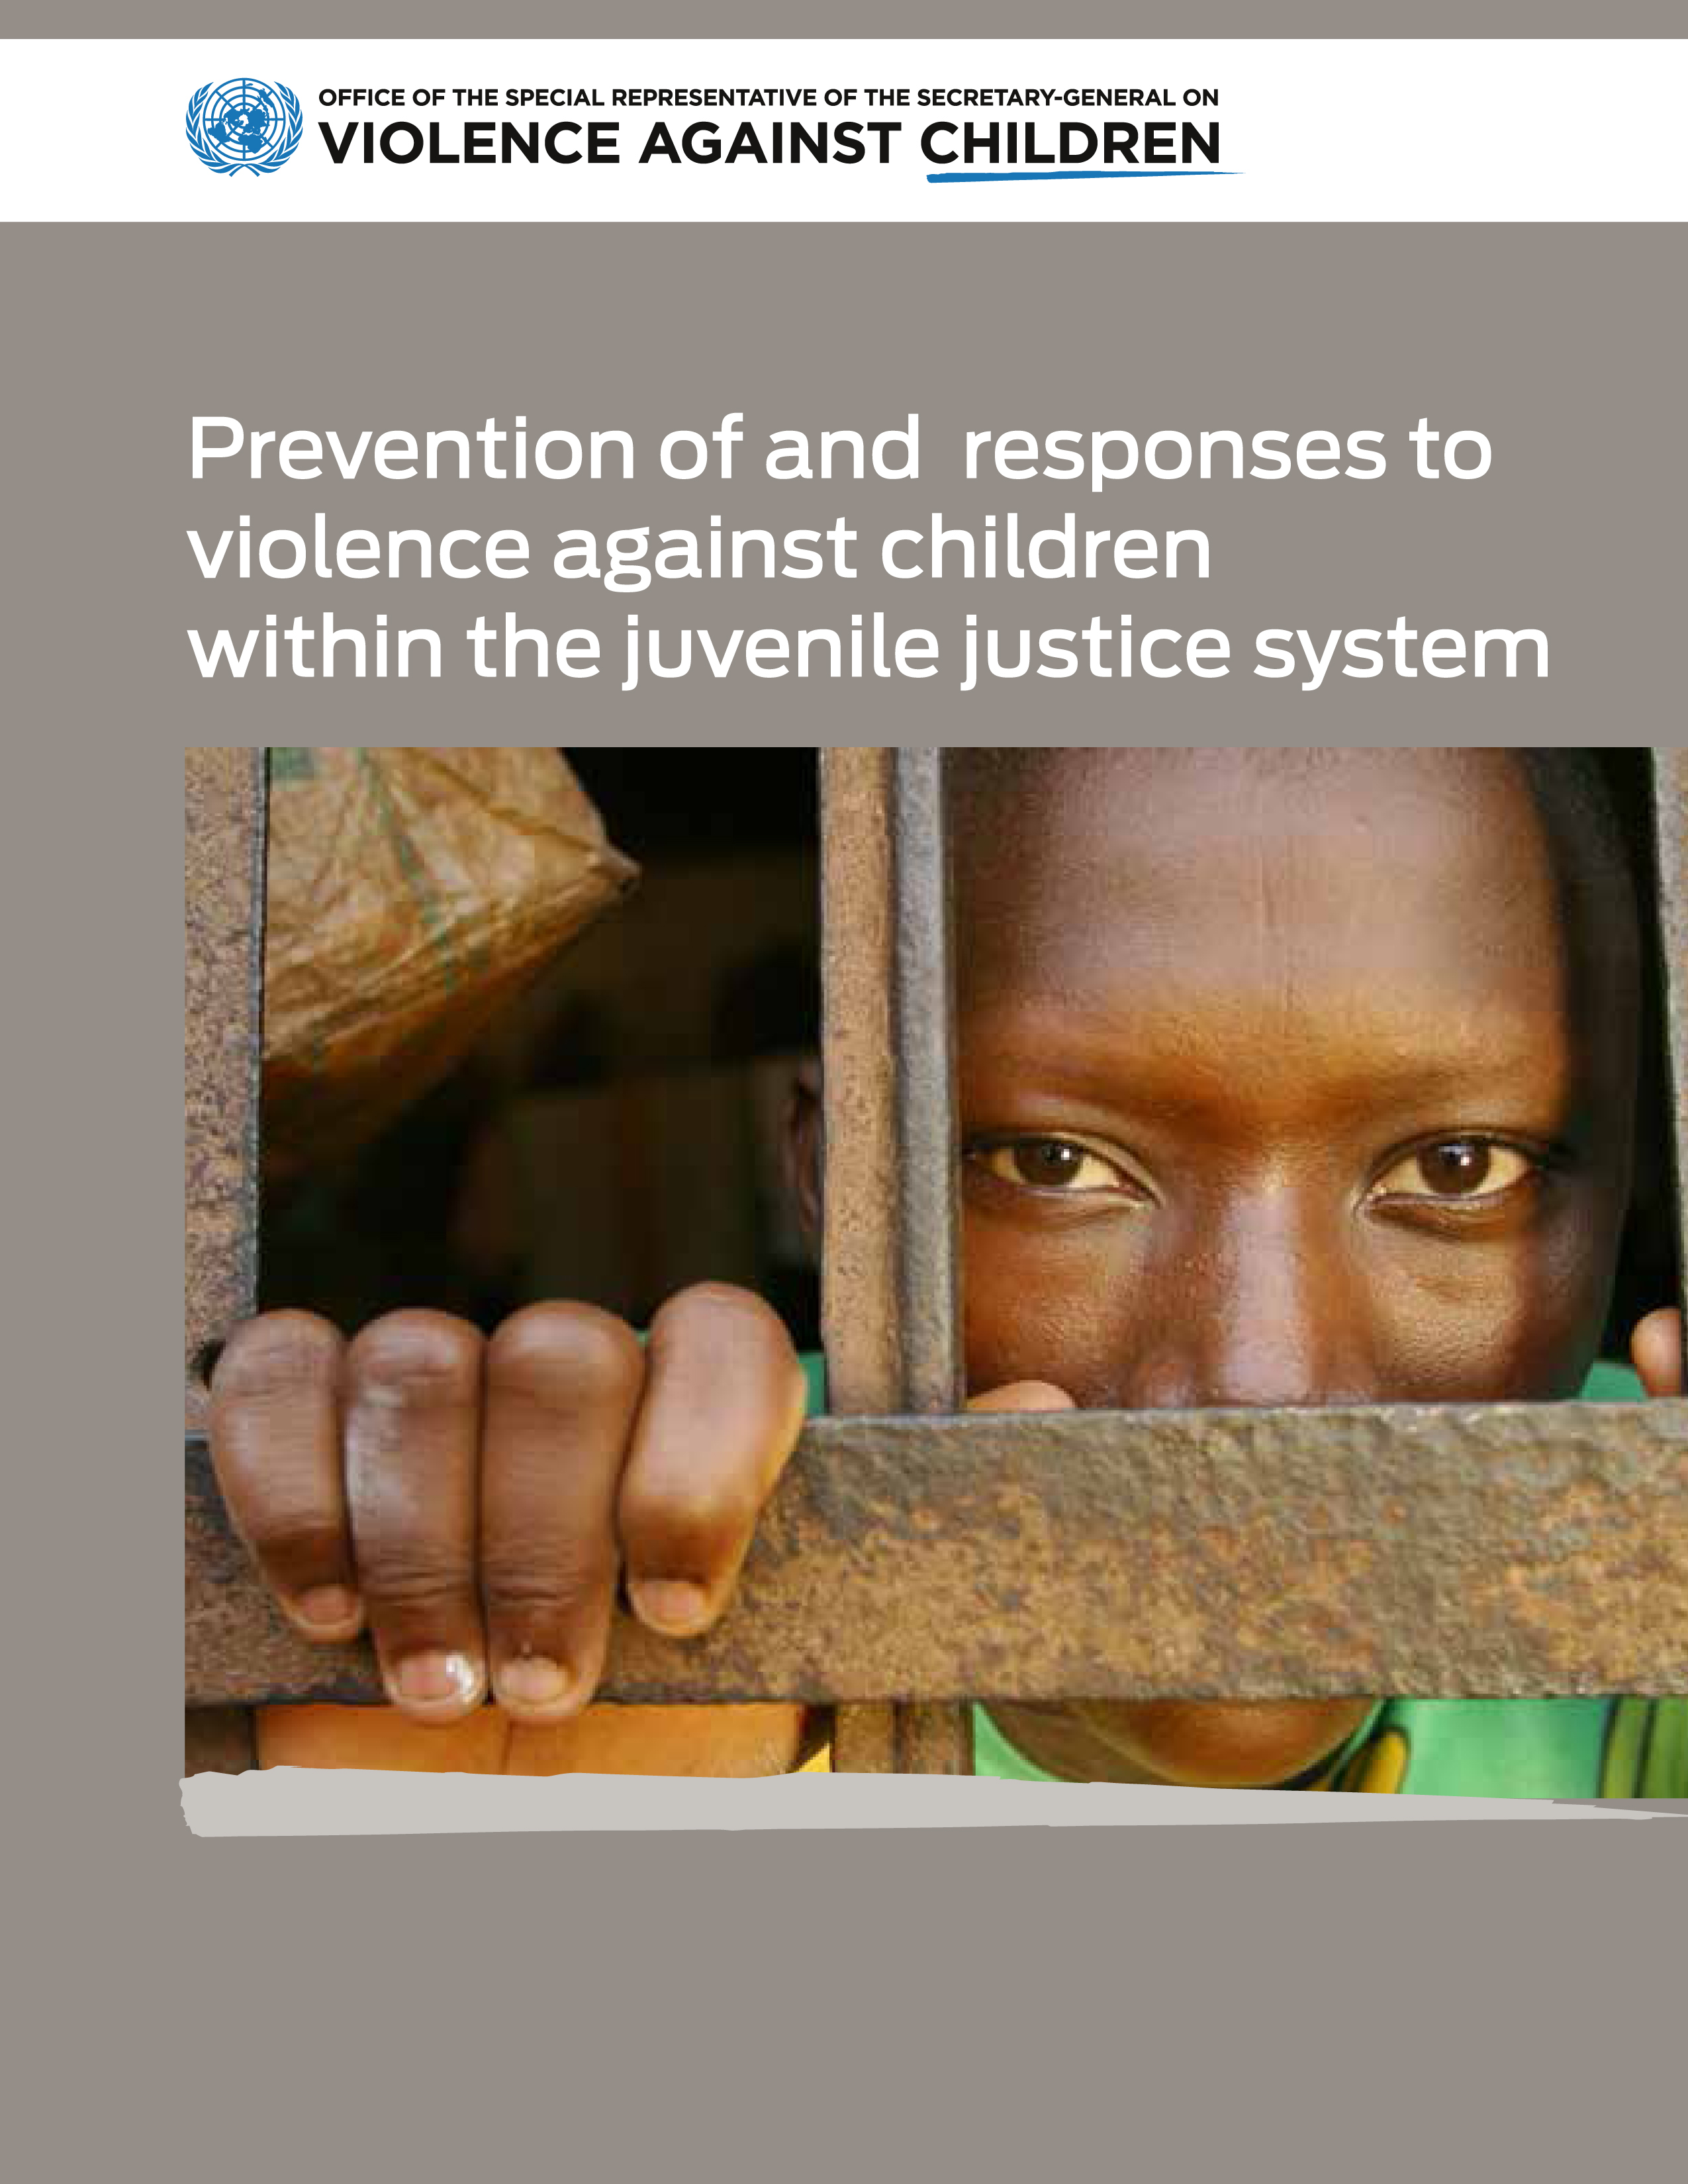 image of Recommended strategies to prevent and respond to violence against children in the juvenile justice system